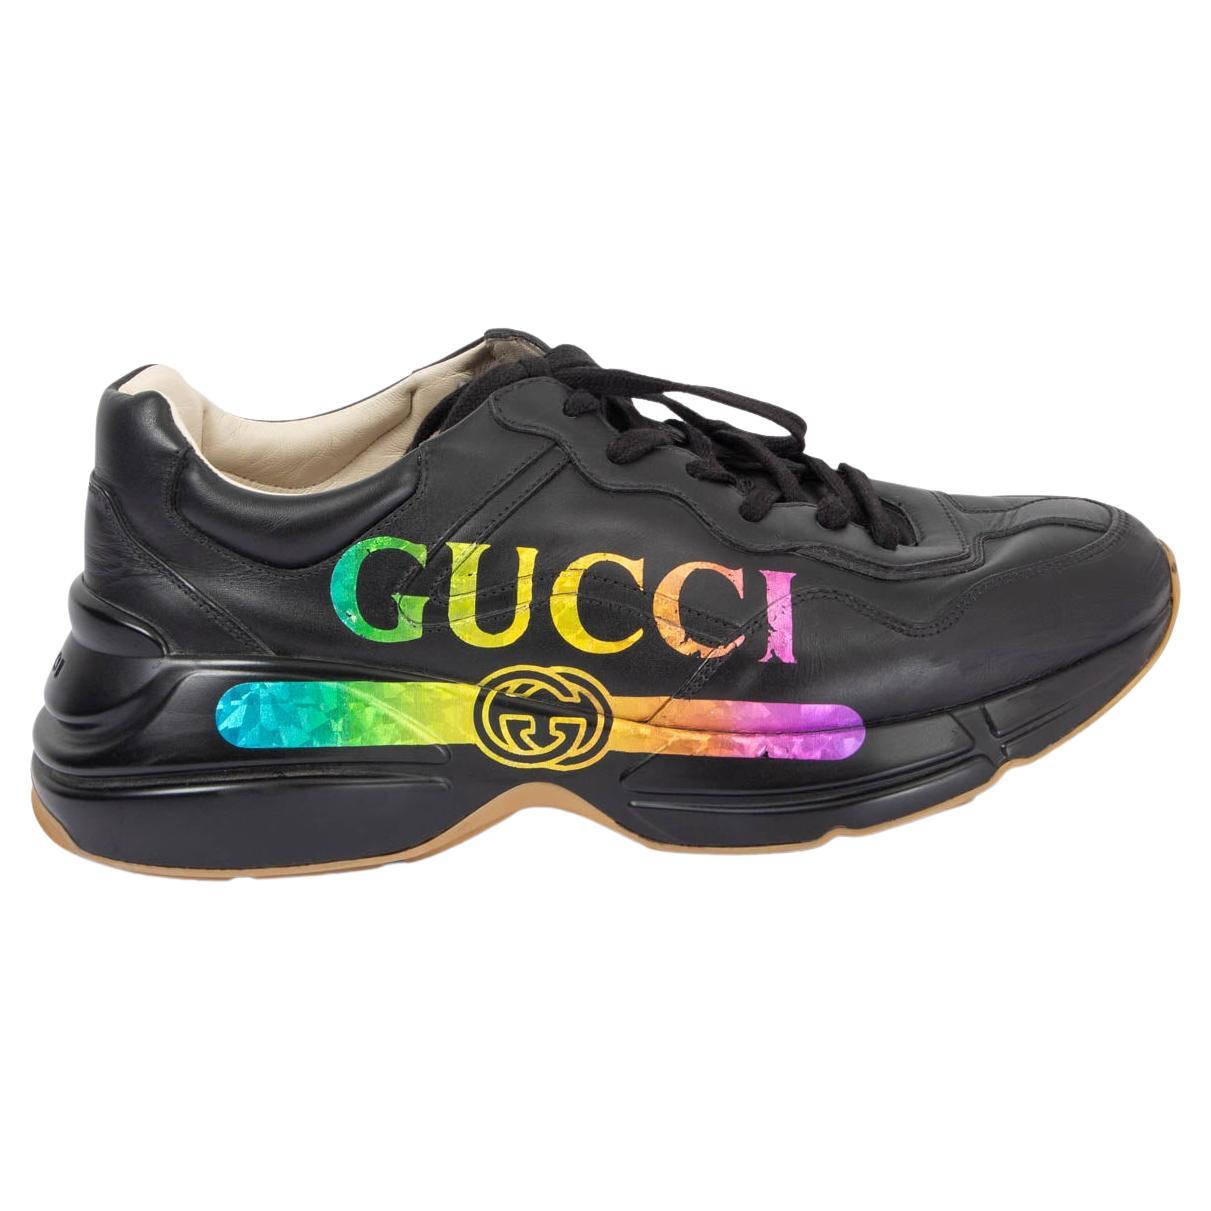 GUCCI black leather RYTHON RAINBOW LOGO Sneakers Shoes 8 42 (mens) or 40 (women) For Sale